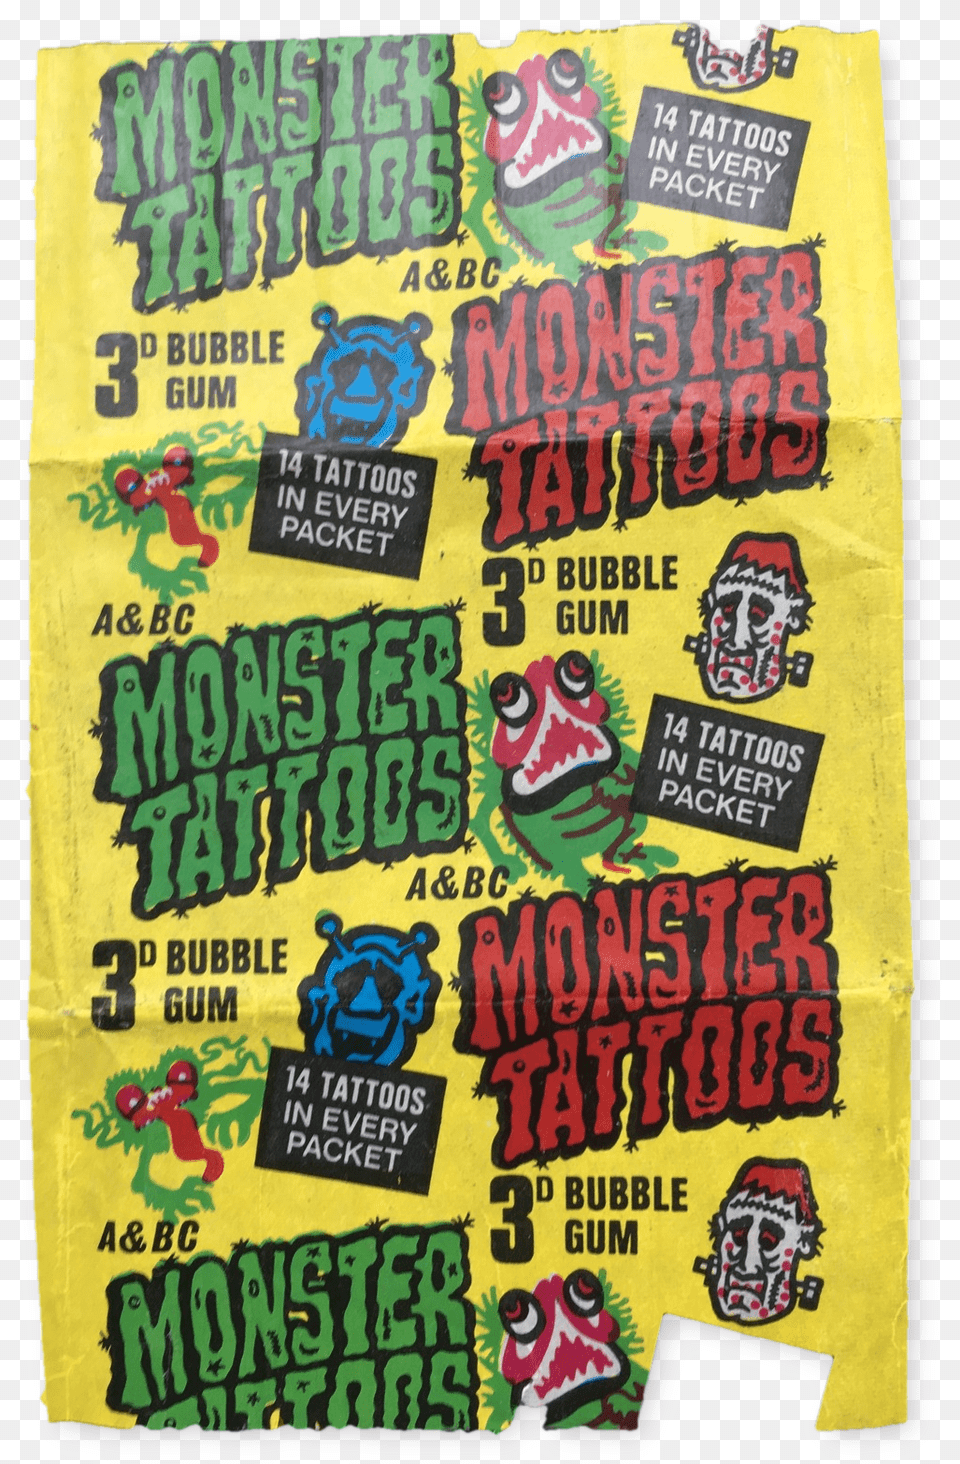 Aampbc Monster Tattoos Wrapper Tattoo, Advertisement, Poster, Sweets, Food Png